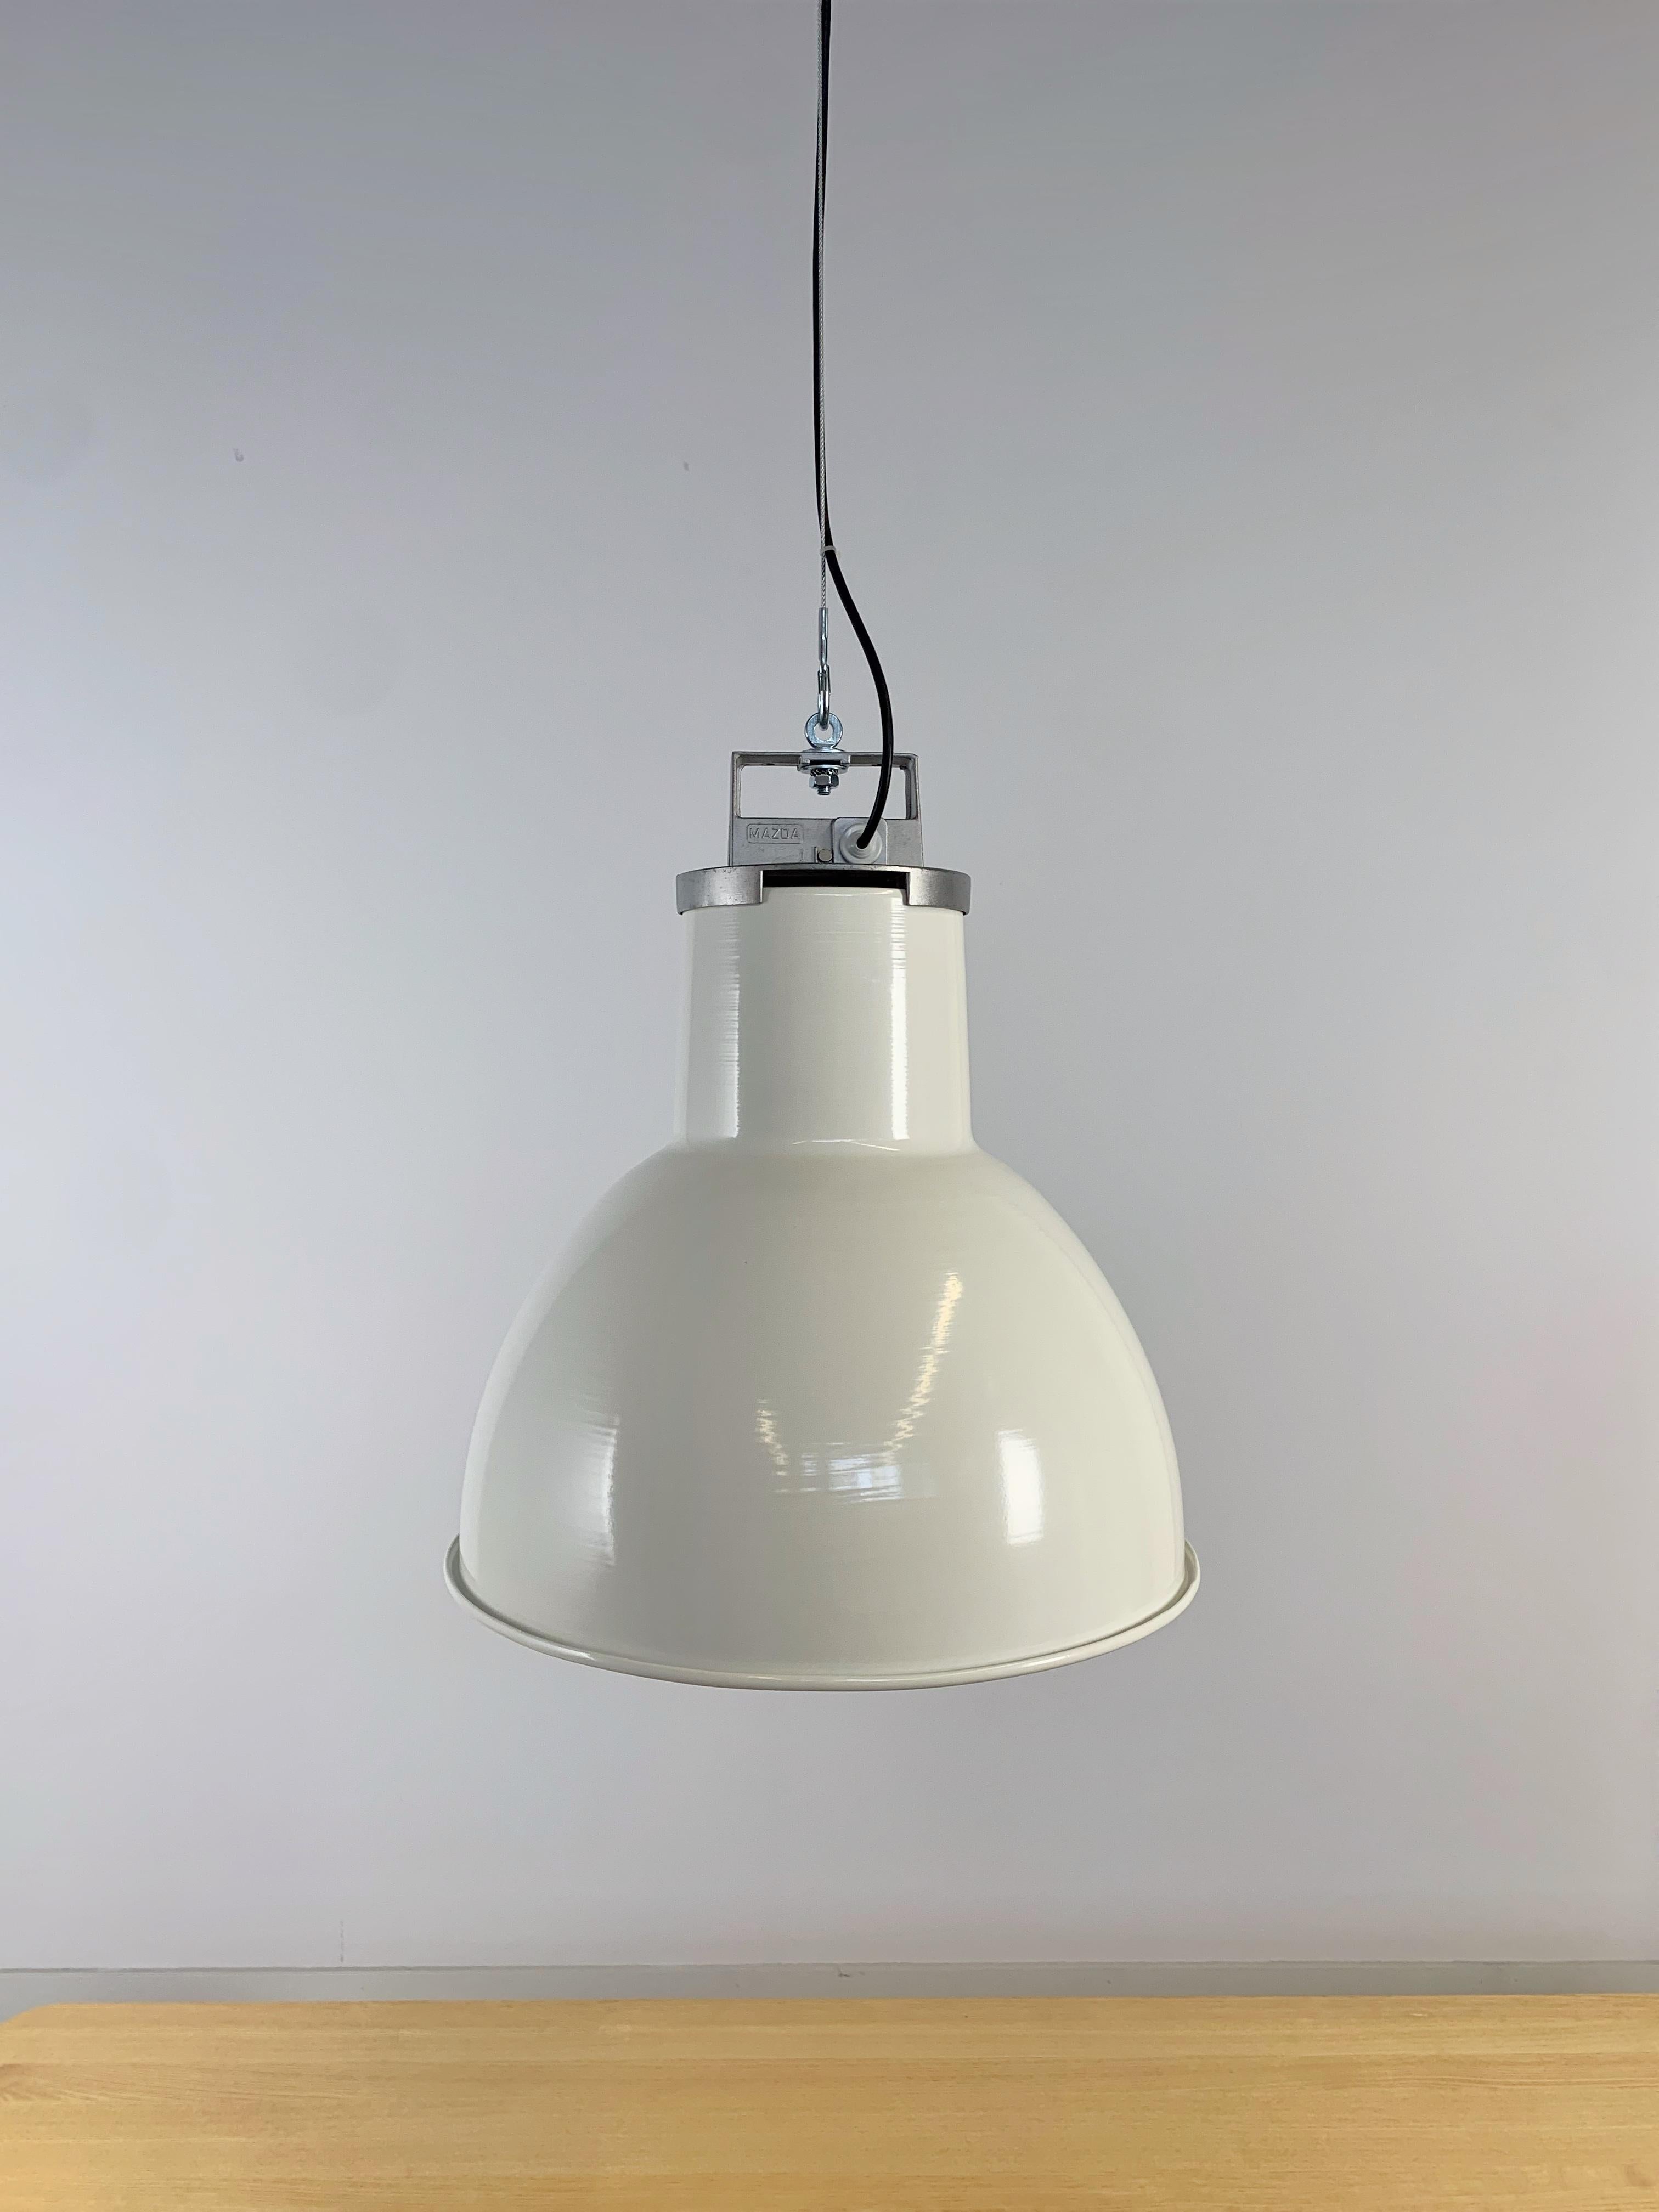 White Redesigned Industrial light pendant Mazda MLA1
These beautiful industrial design lamps come from old abandoned factories in France. The lamps were equipped with a 700 watt gas discharge lamp so that there was enough light to work. We upcycle